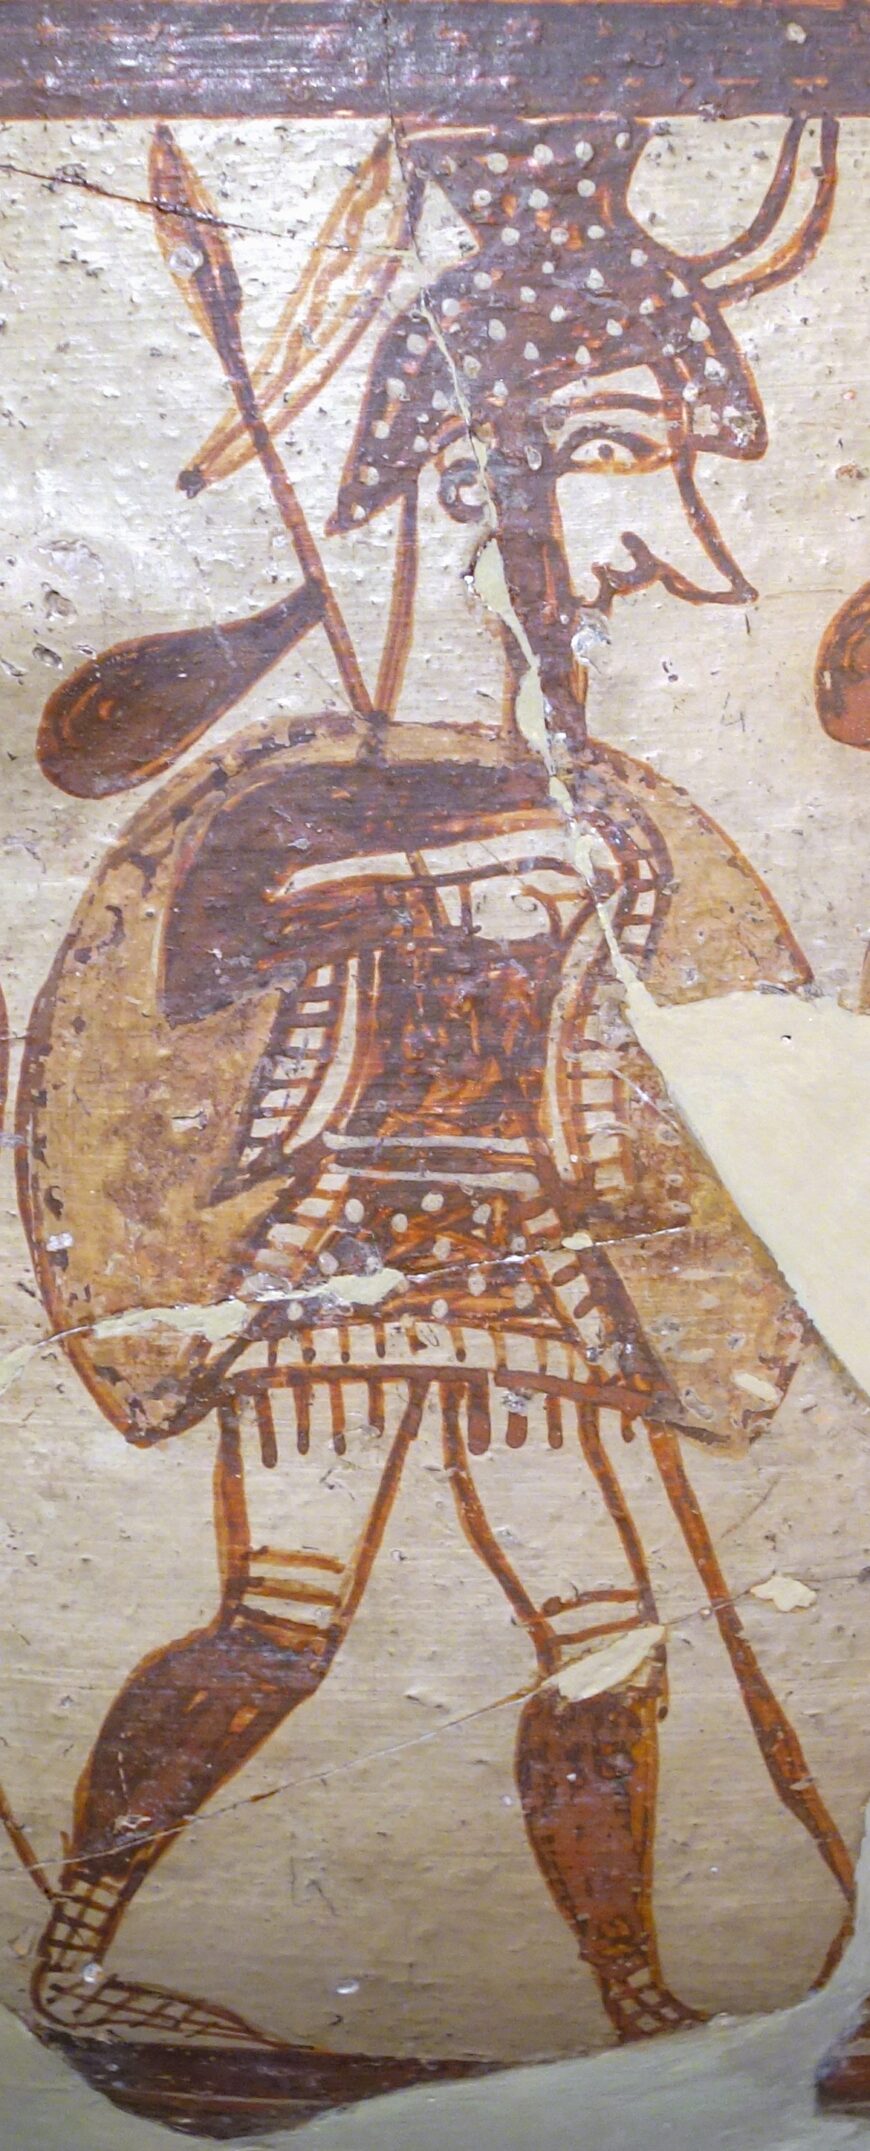 Soldier on front of Warrior Krater (detail), c. 1200–1100 B.C.E., ceramic (National Archaeological Museum, Athens; photo: Steven Zucker, CC BY-NC-SA 2.0)